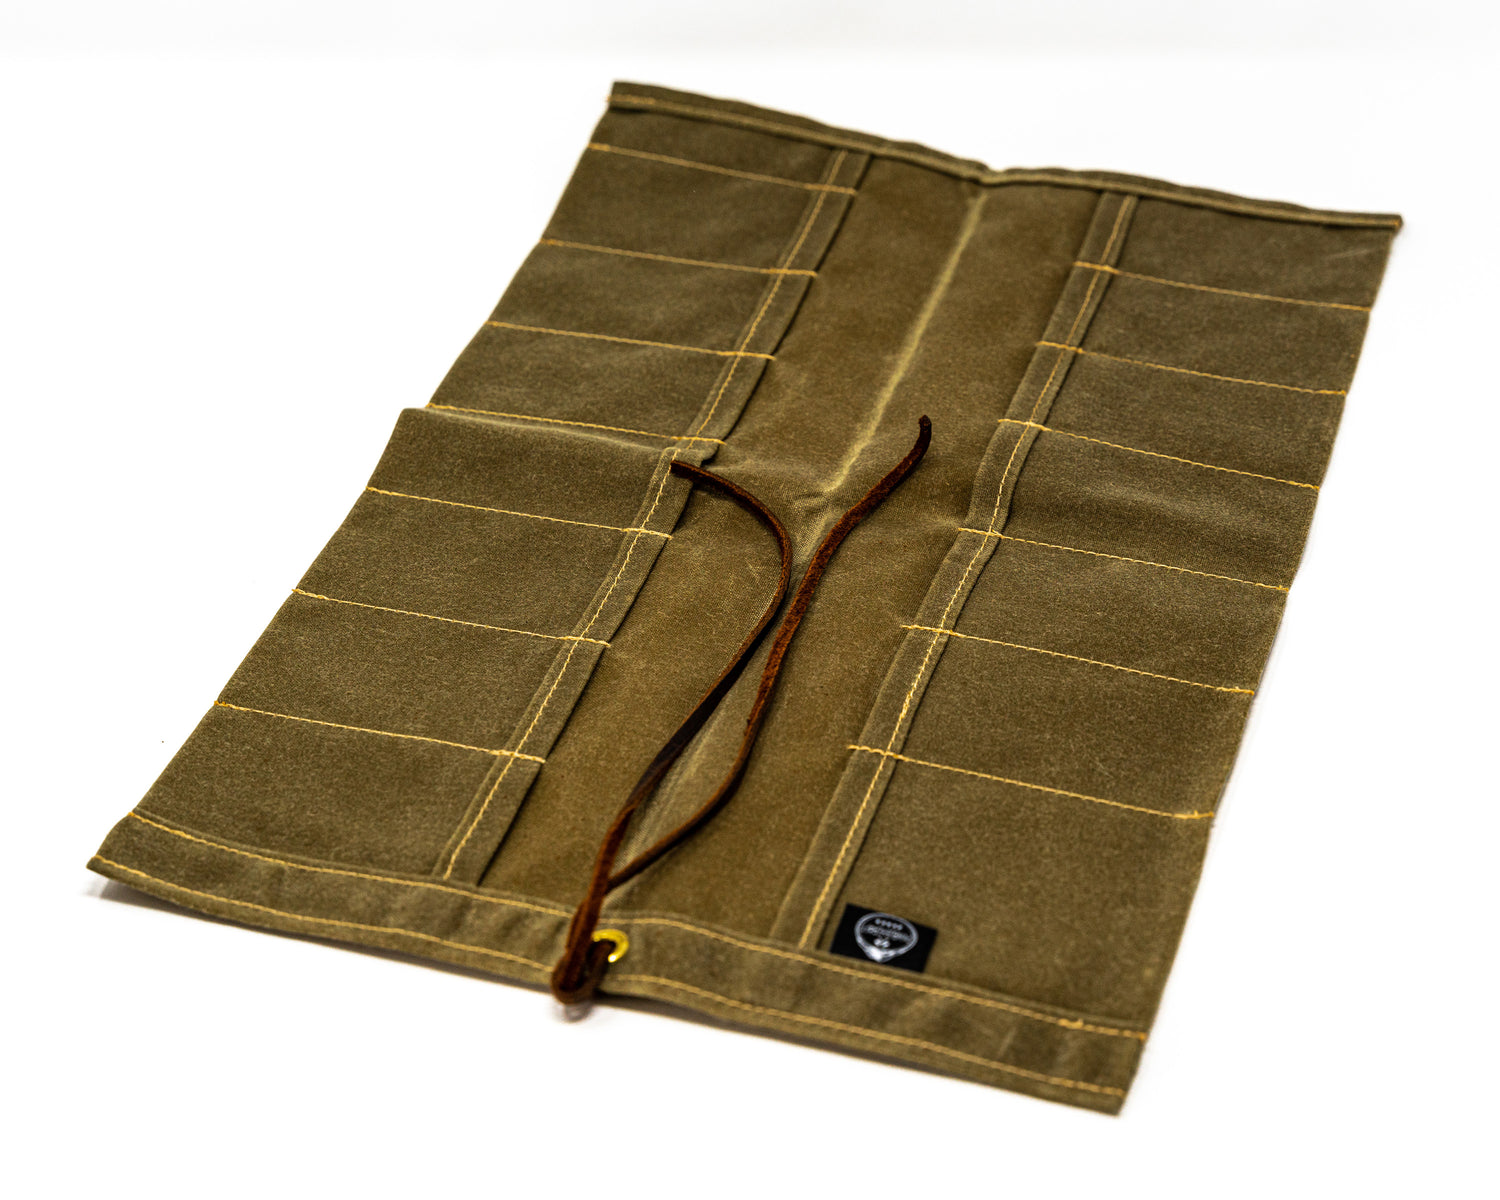 Open PNW Bushcraft Maple Waxed Canvas Knife Roll in Tan positioned at an angle on a white background.